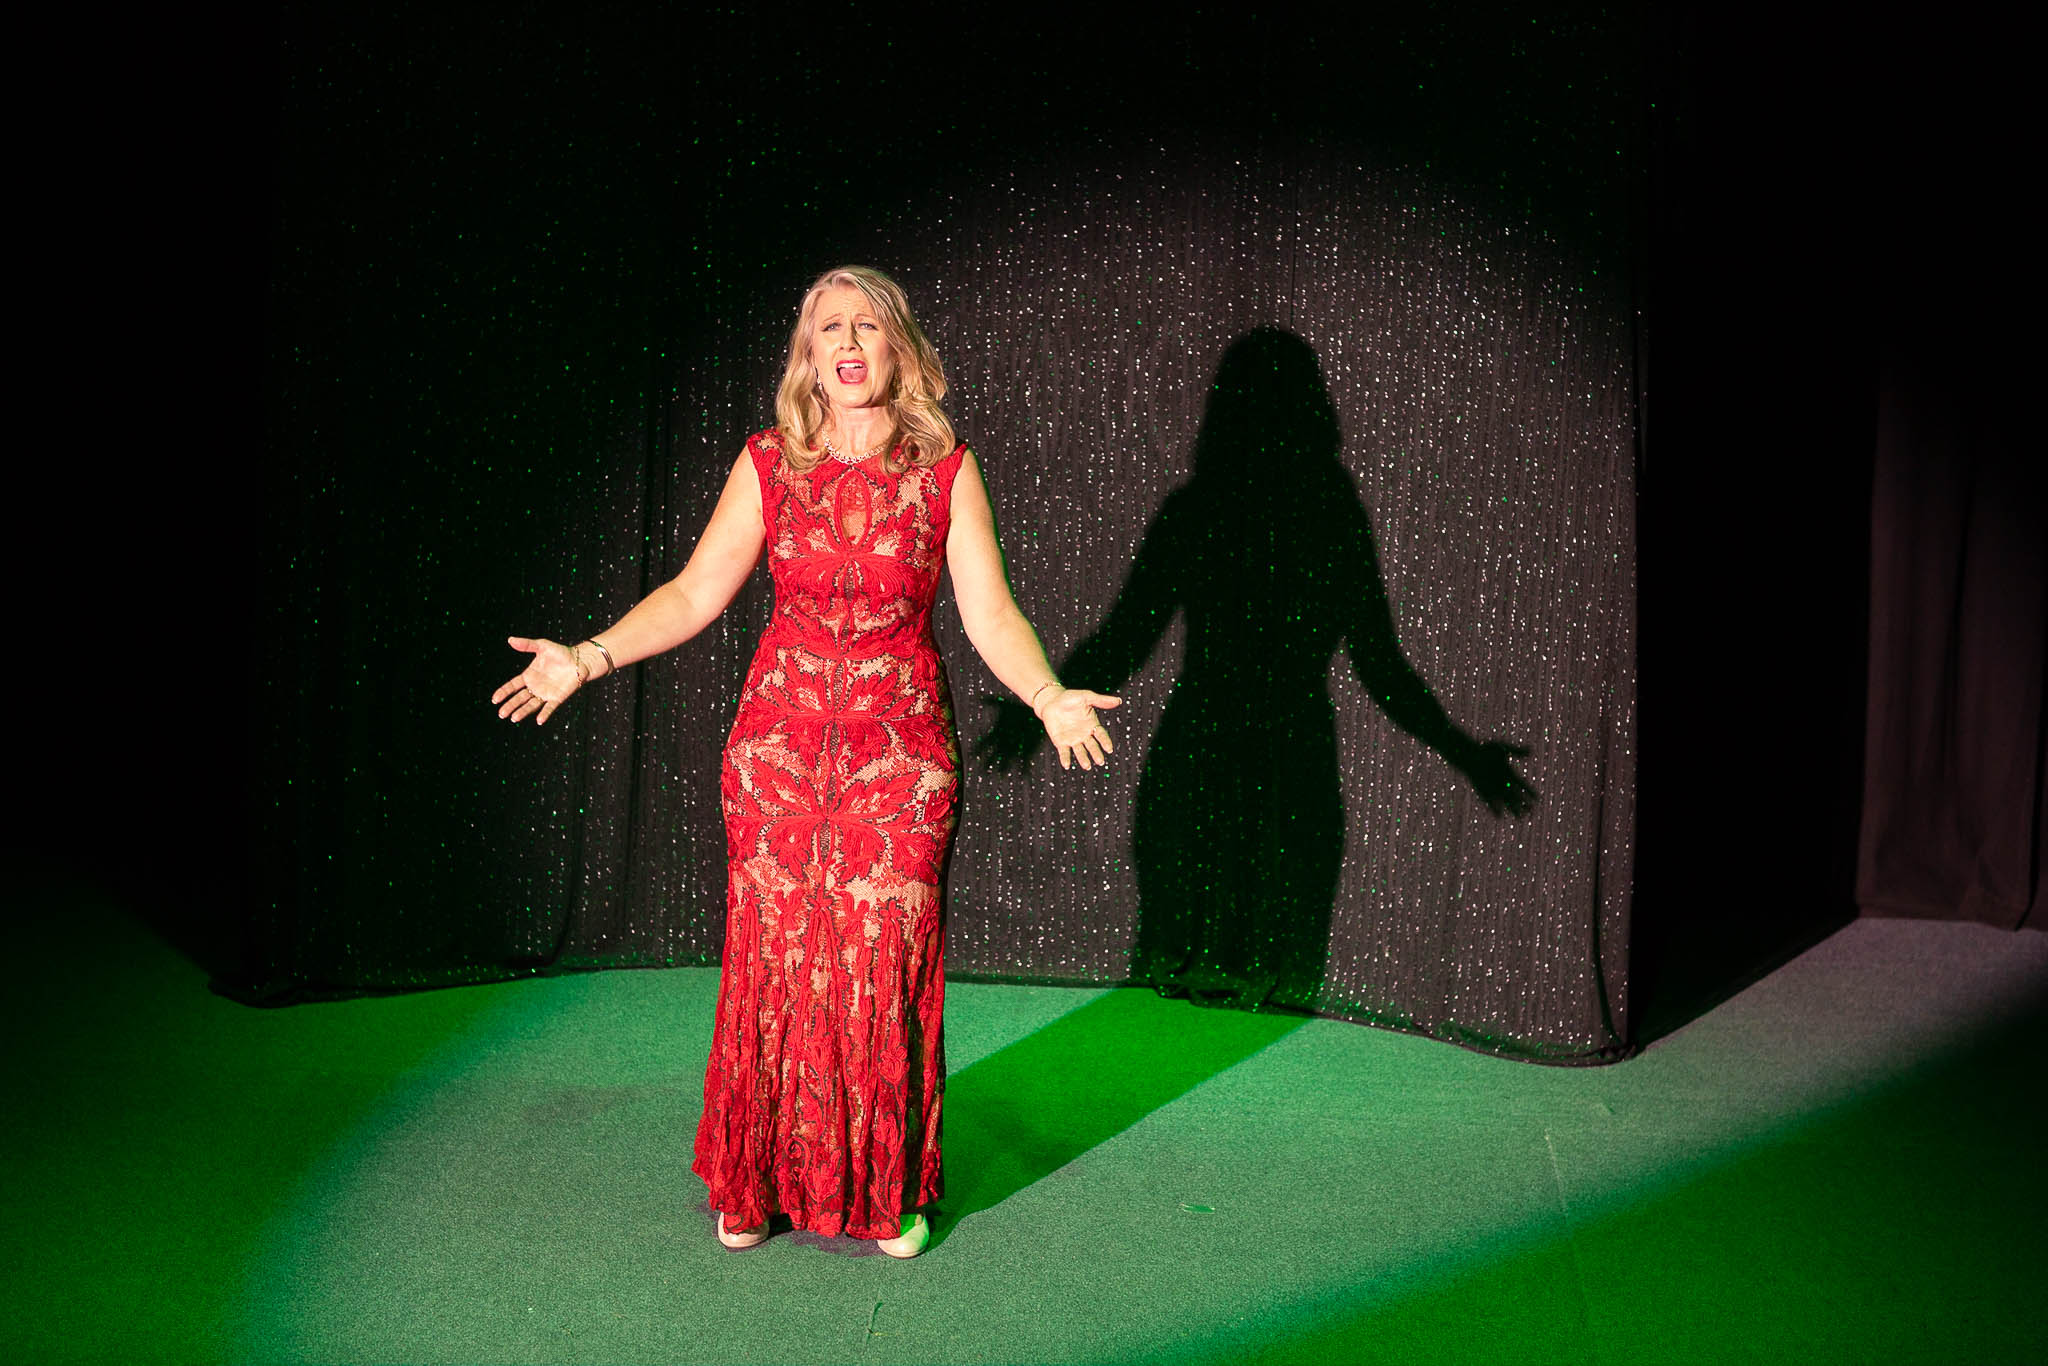 Performer in red dress singing on stage. Photo by Caro Telfer, Photographer.